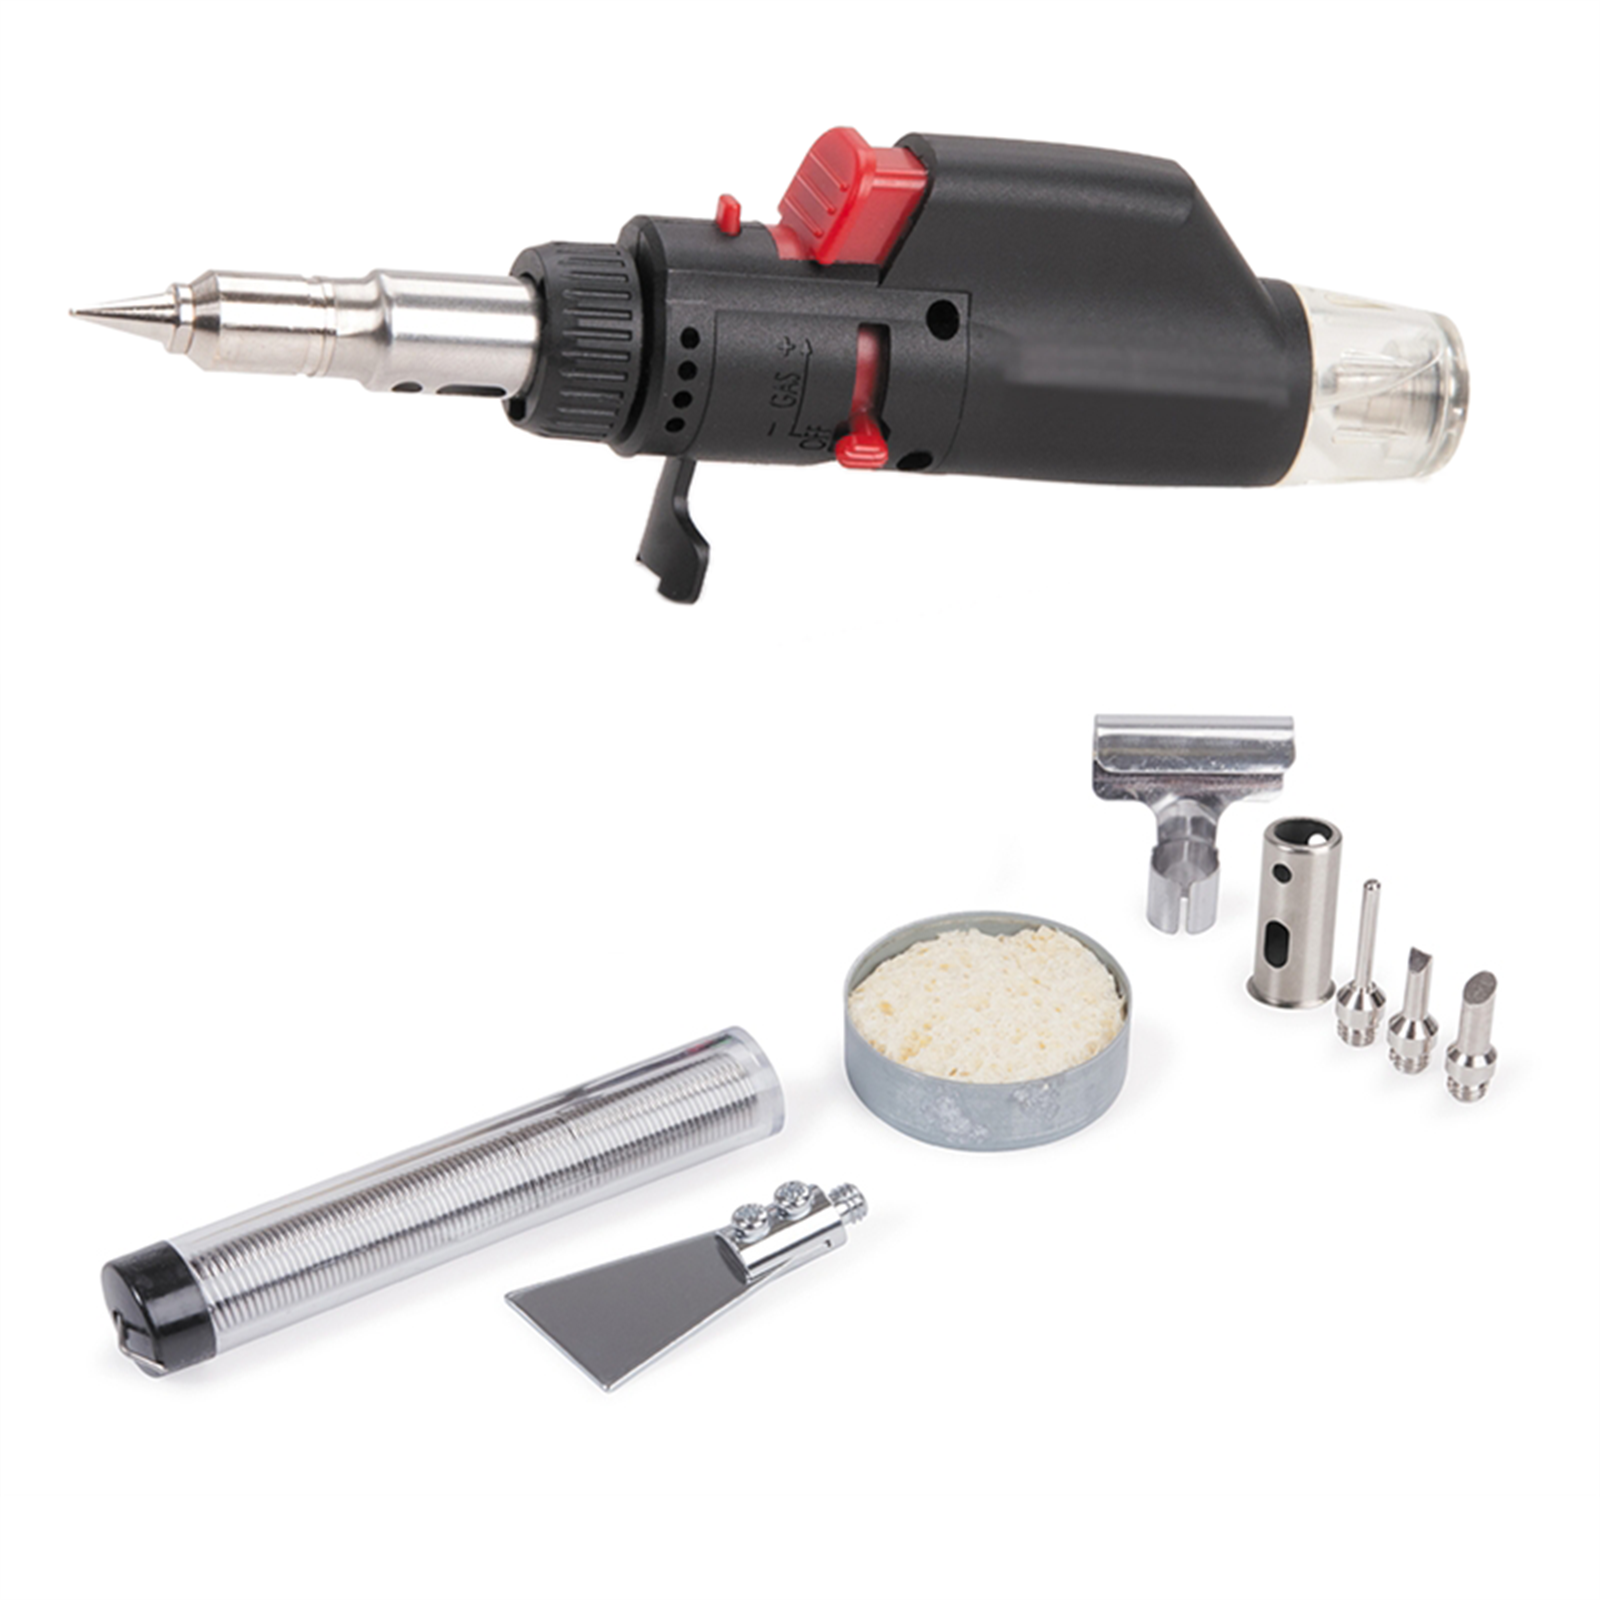 Tradeflame 10 In 1 Micro Soldering Torch Hot Air Kit